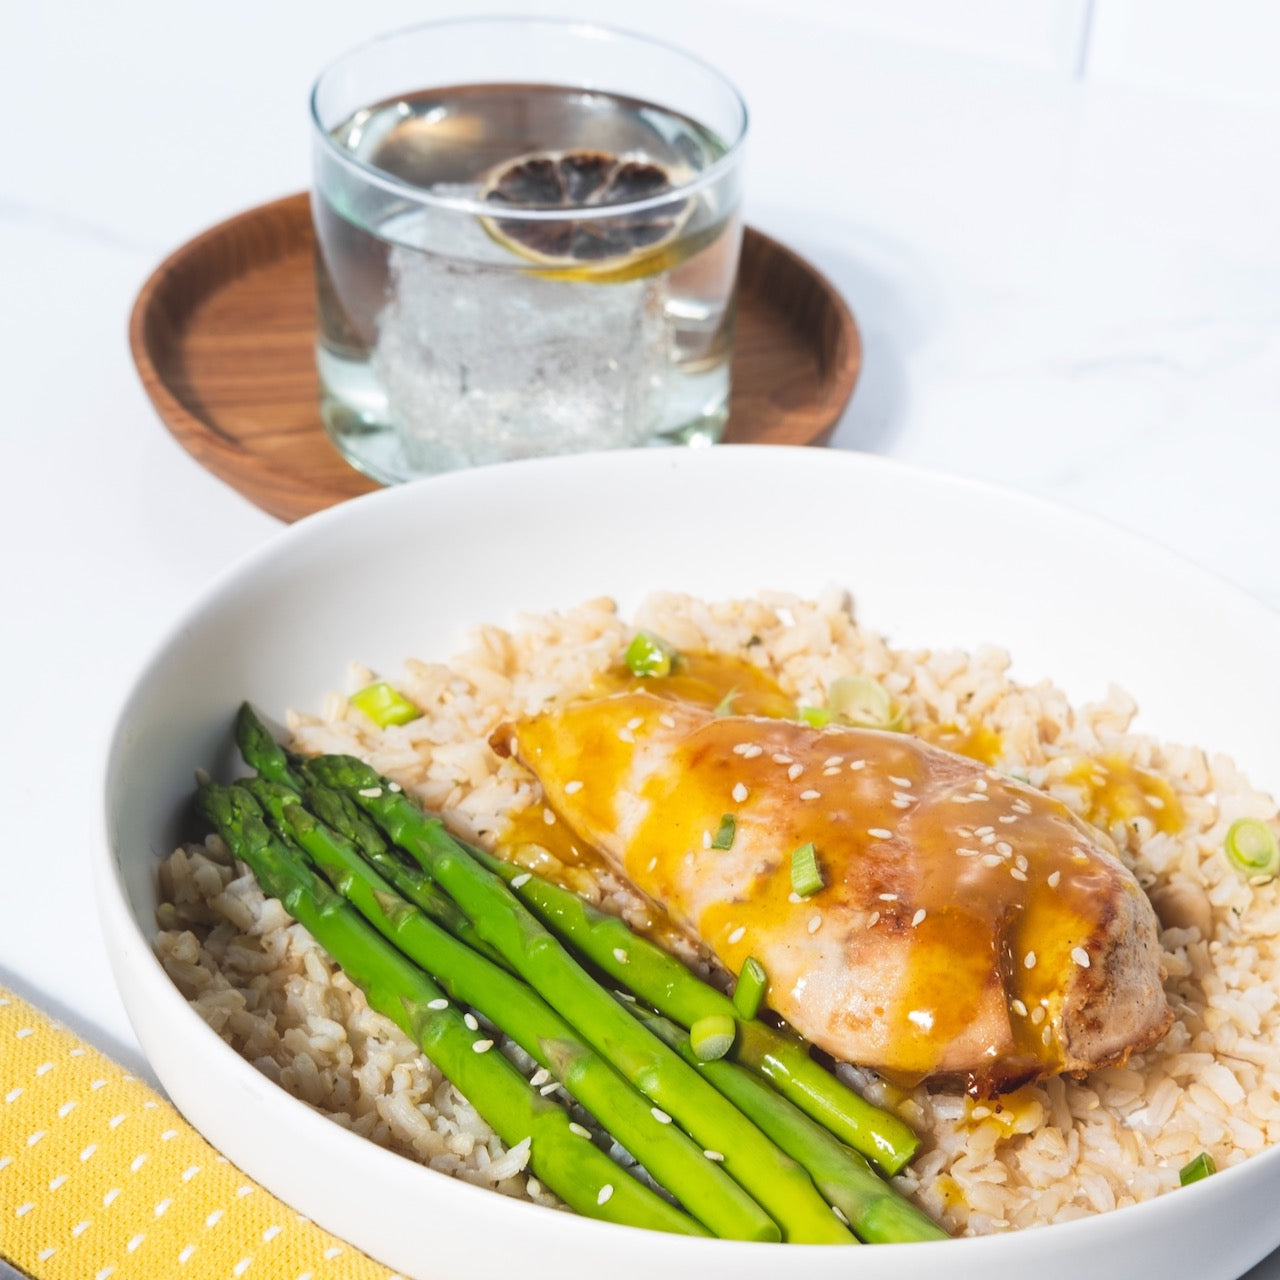 A plate with chicken, asparagus, and brown rice backdropped by a glass filled with soda water and a dried slice of red grapefruit.